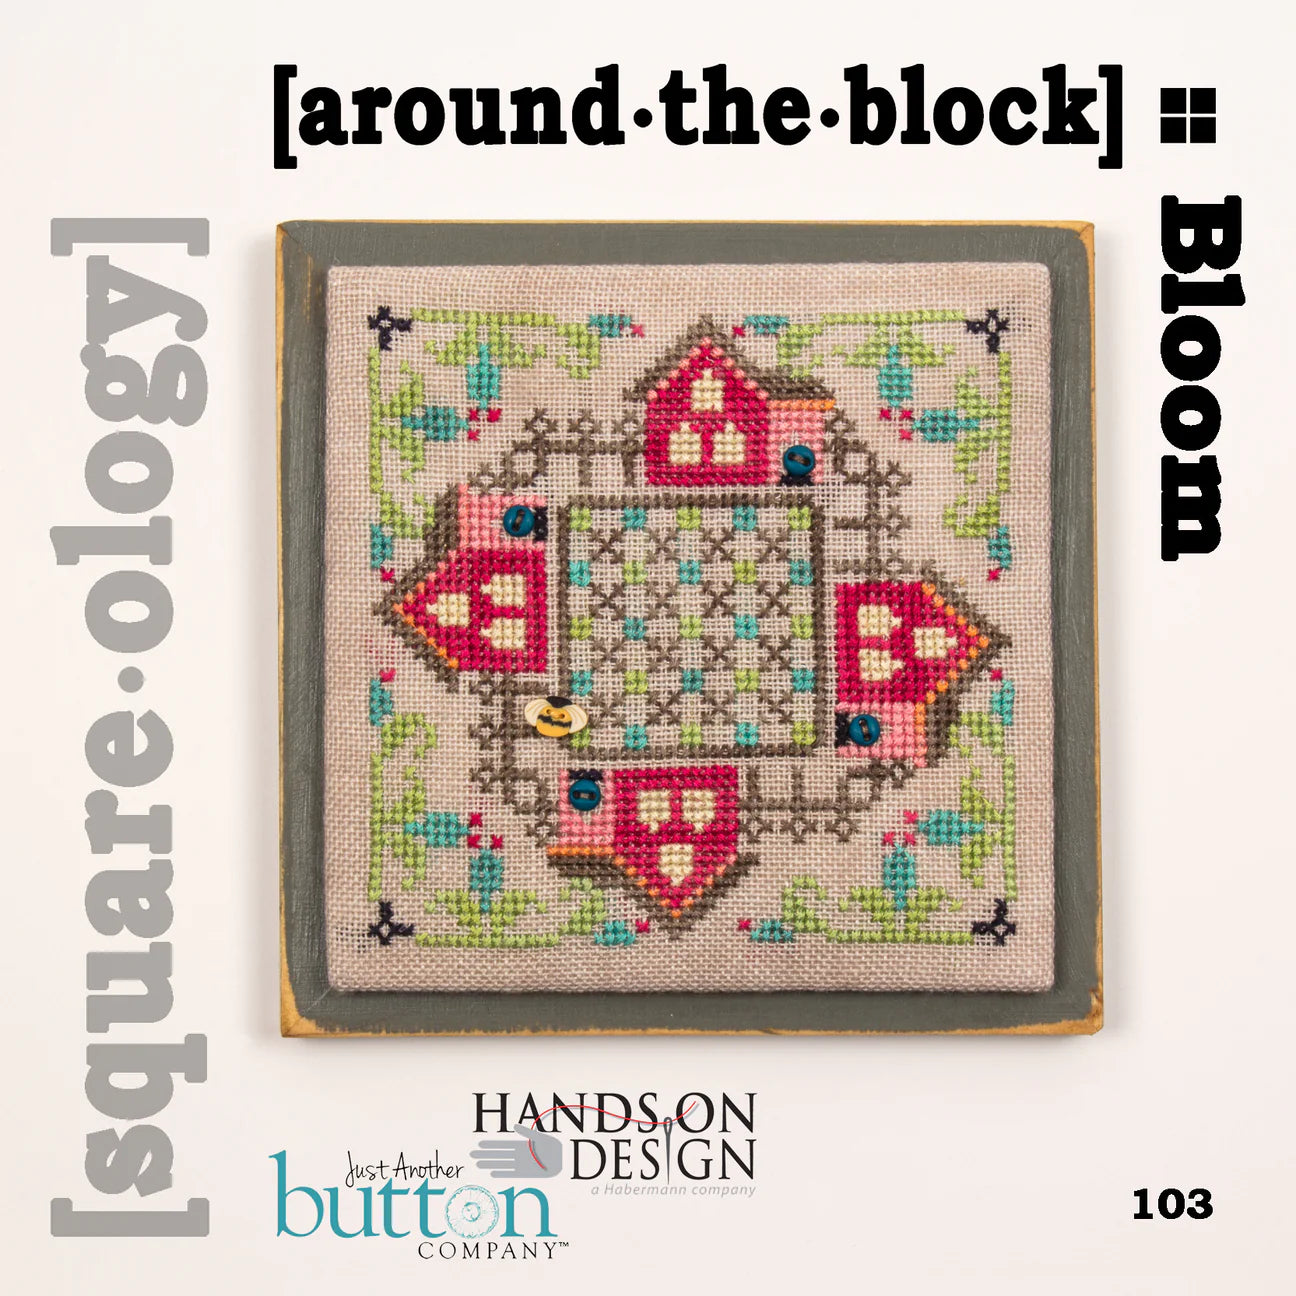 [square.ology] around.the.block - Just Another Button Company